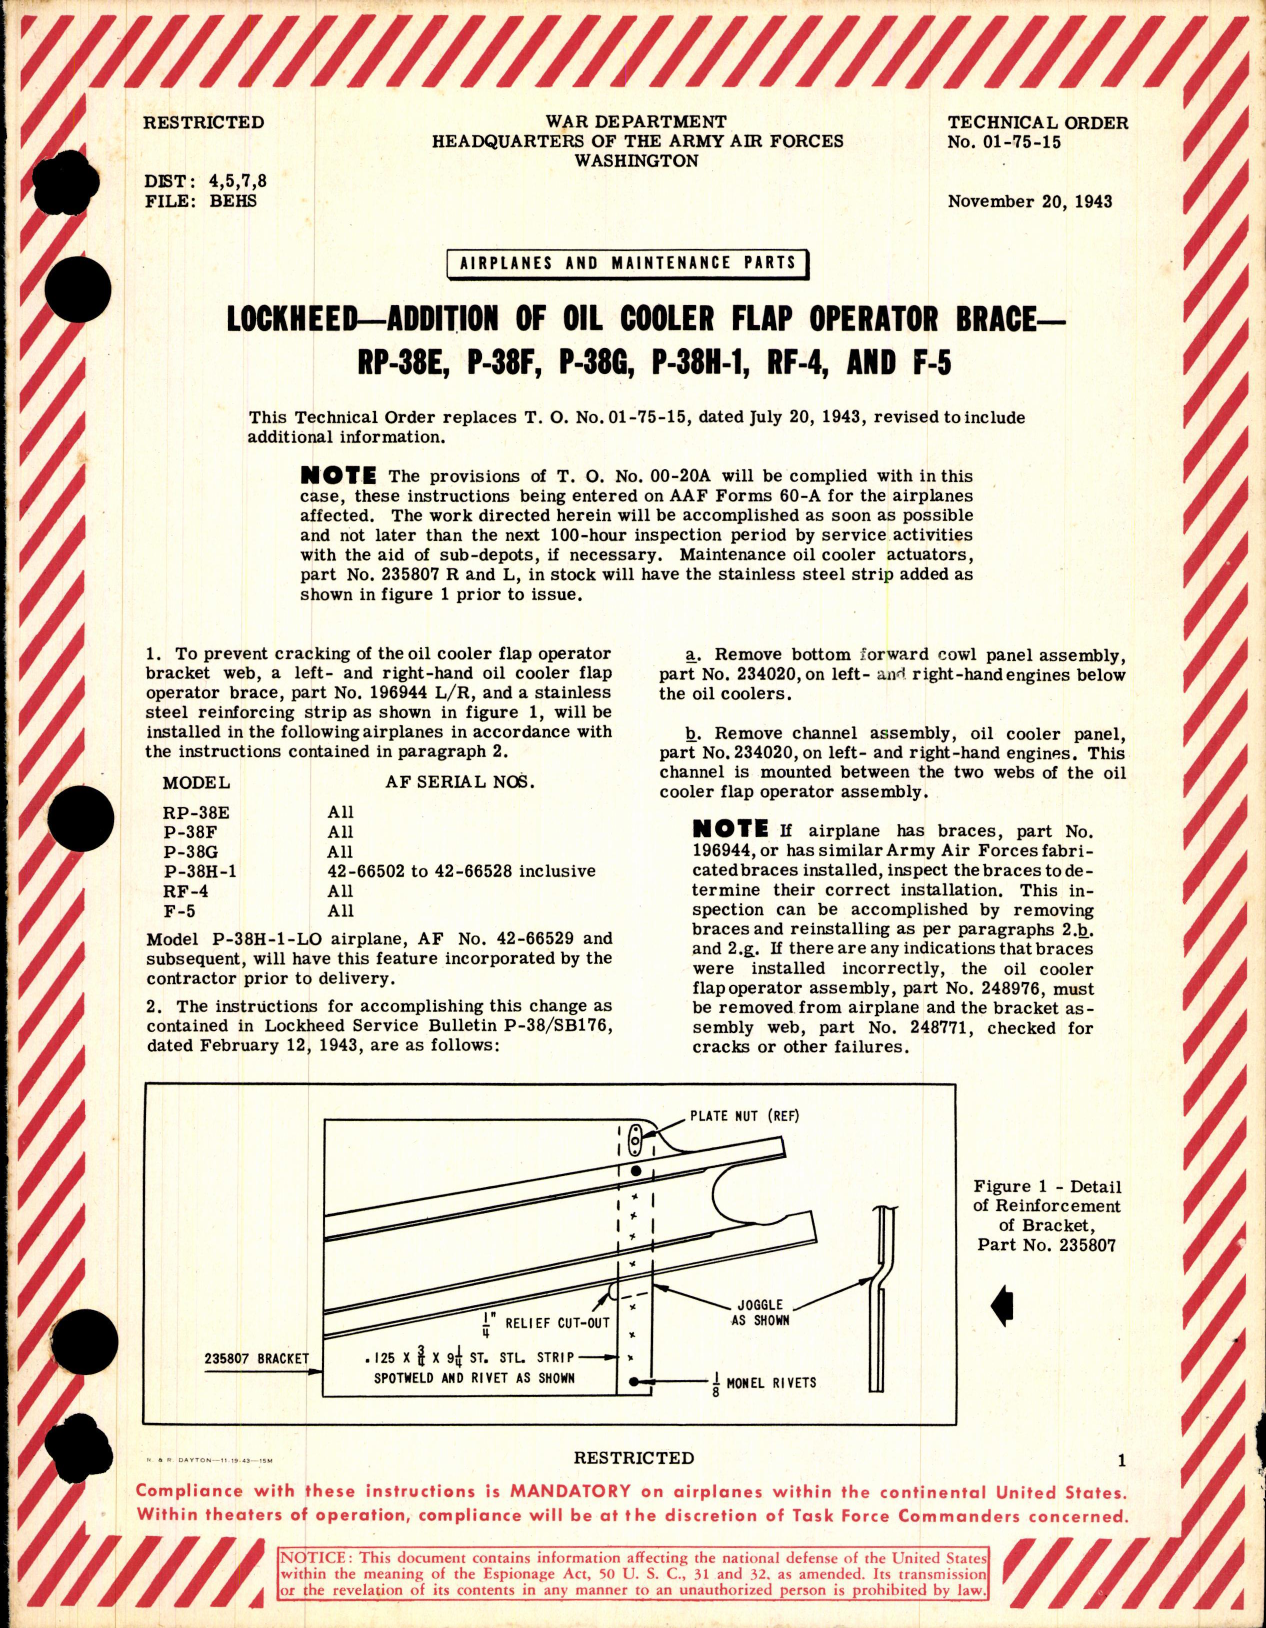 Sample page 1 from AirCorps Library document: Addition of Oil Cooler Flap Operator Brace for RP-38E, F, H-1, RF-4 and F-5